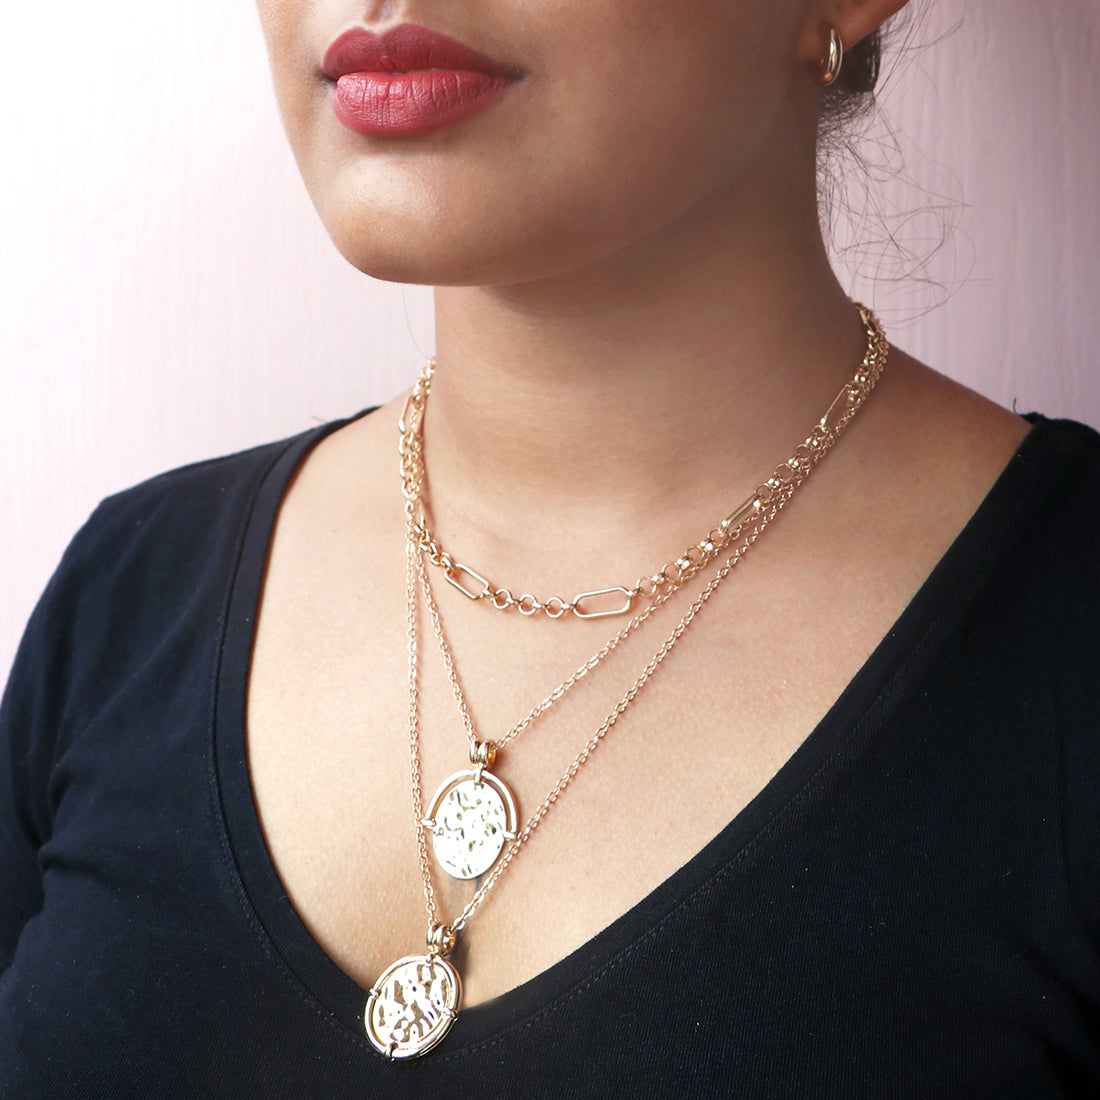 CHUNKY COIN PENDANT CHAIN-LINK STATEMENT GOLD-TONED LAYERED NECKLACE